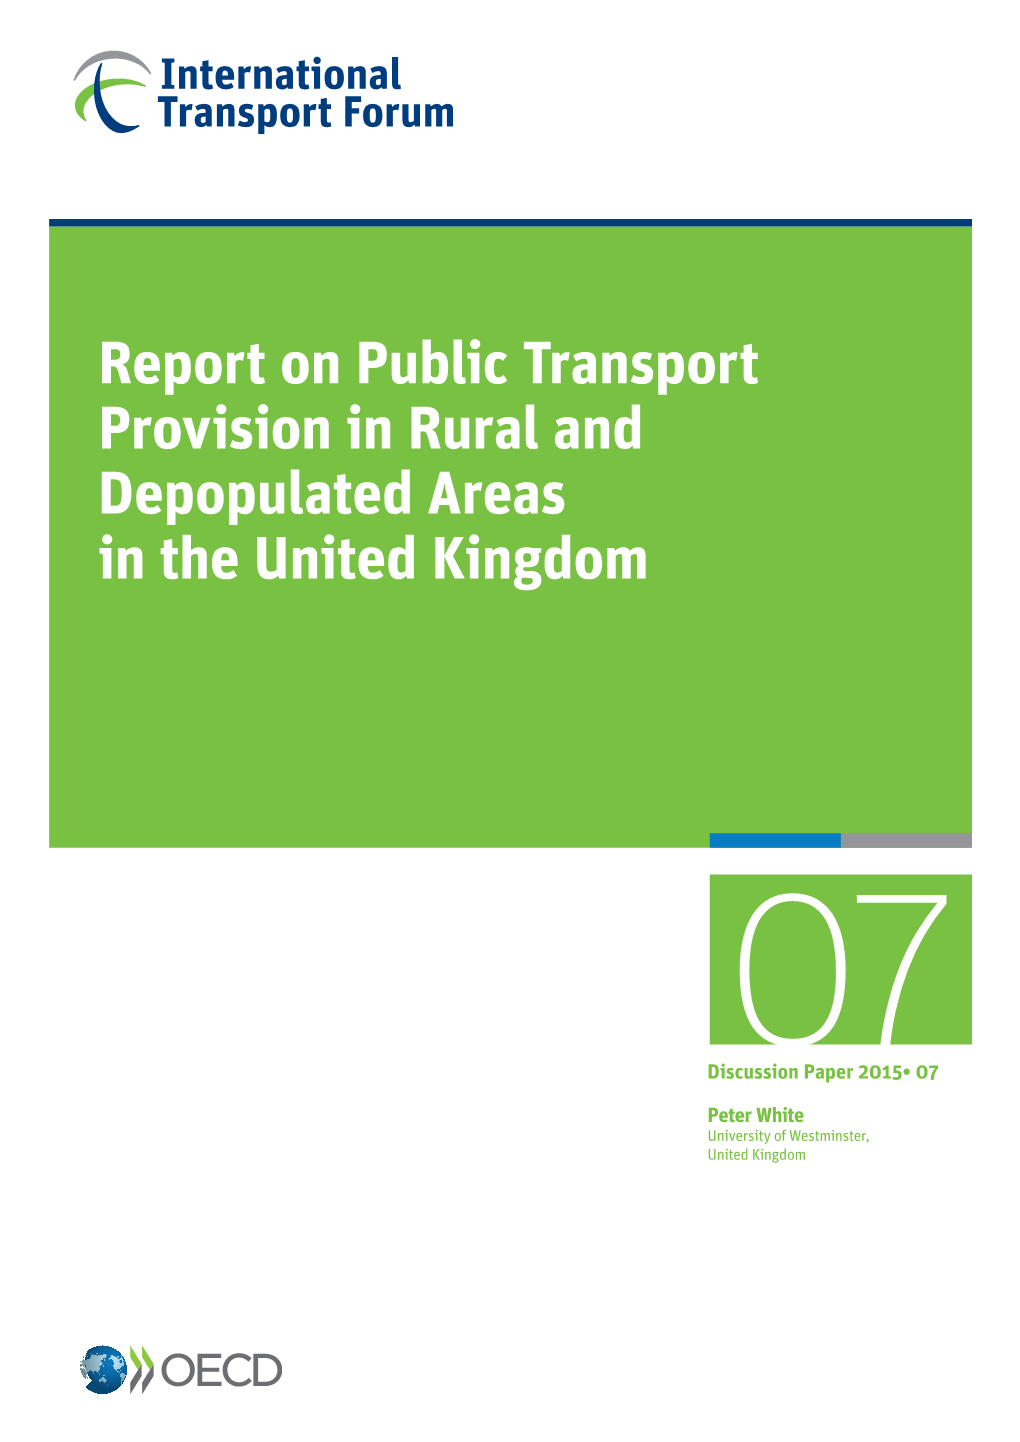 Report on Public Transport Provision in Rural and Depopulated Areas in the United Kingdom